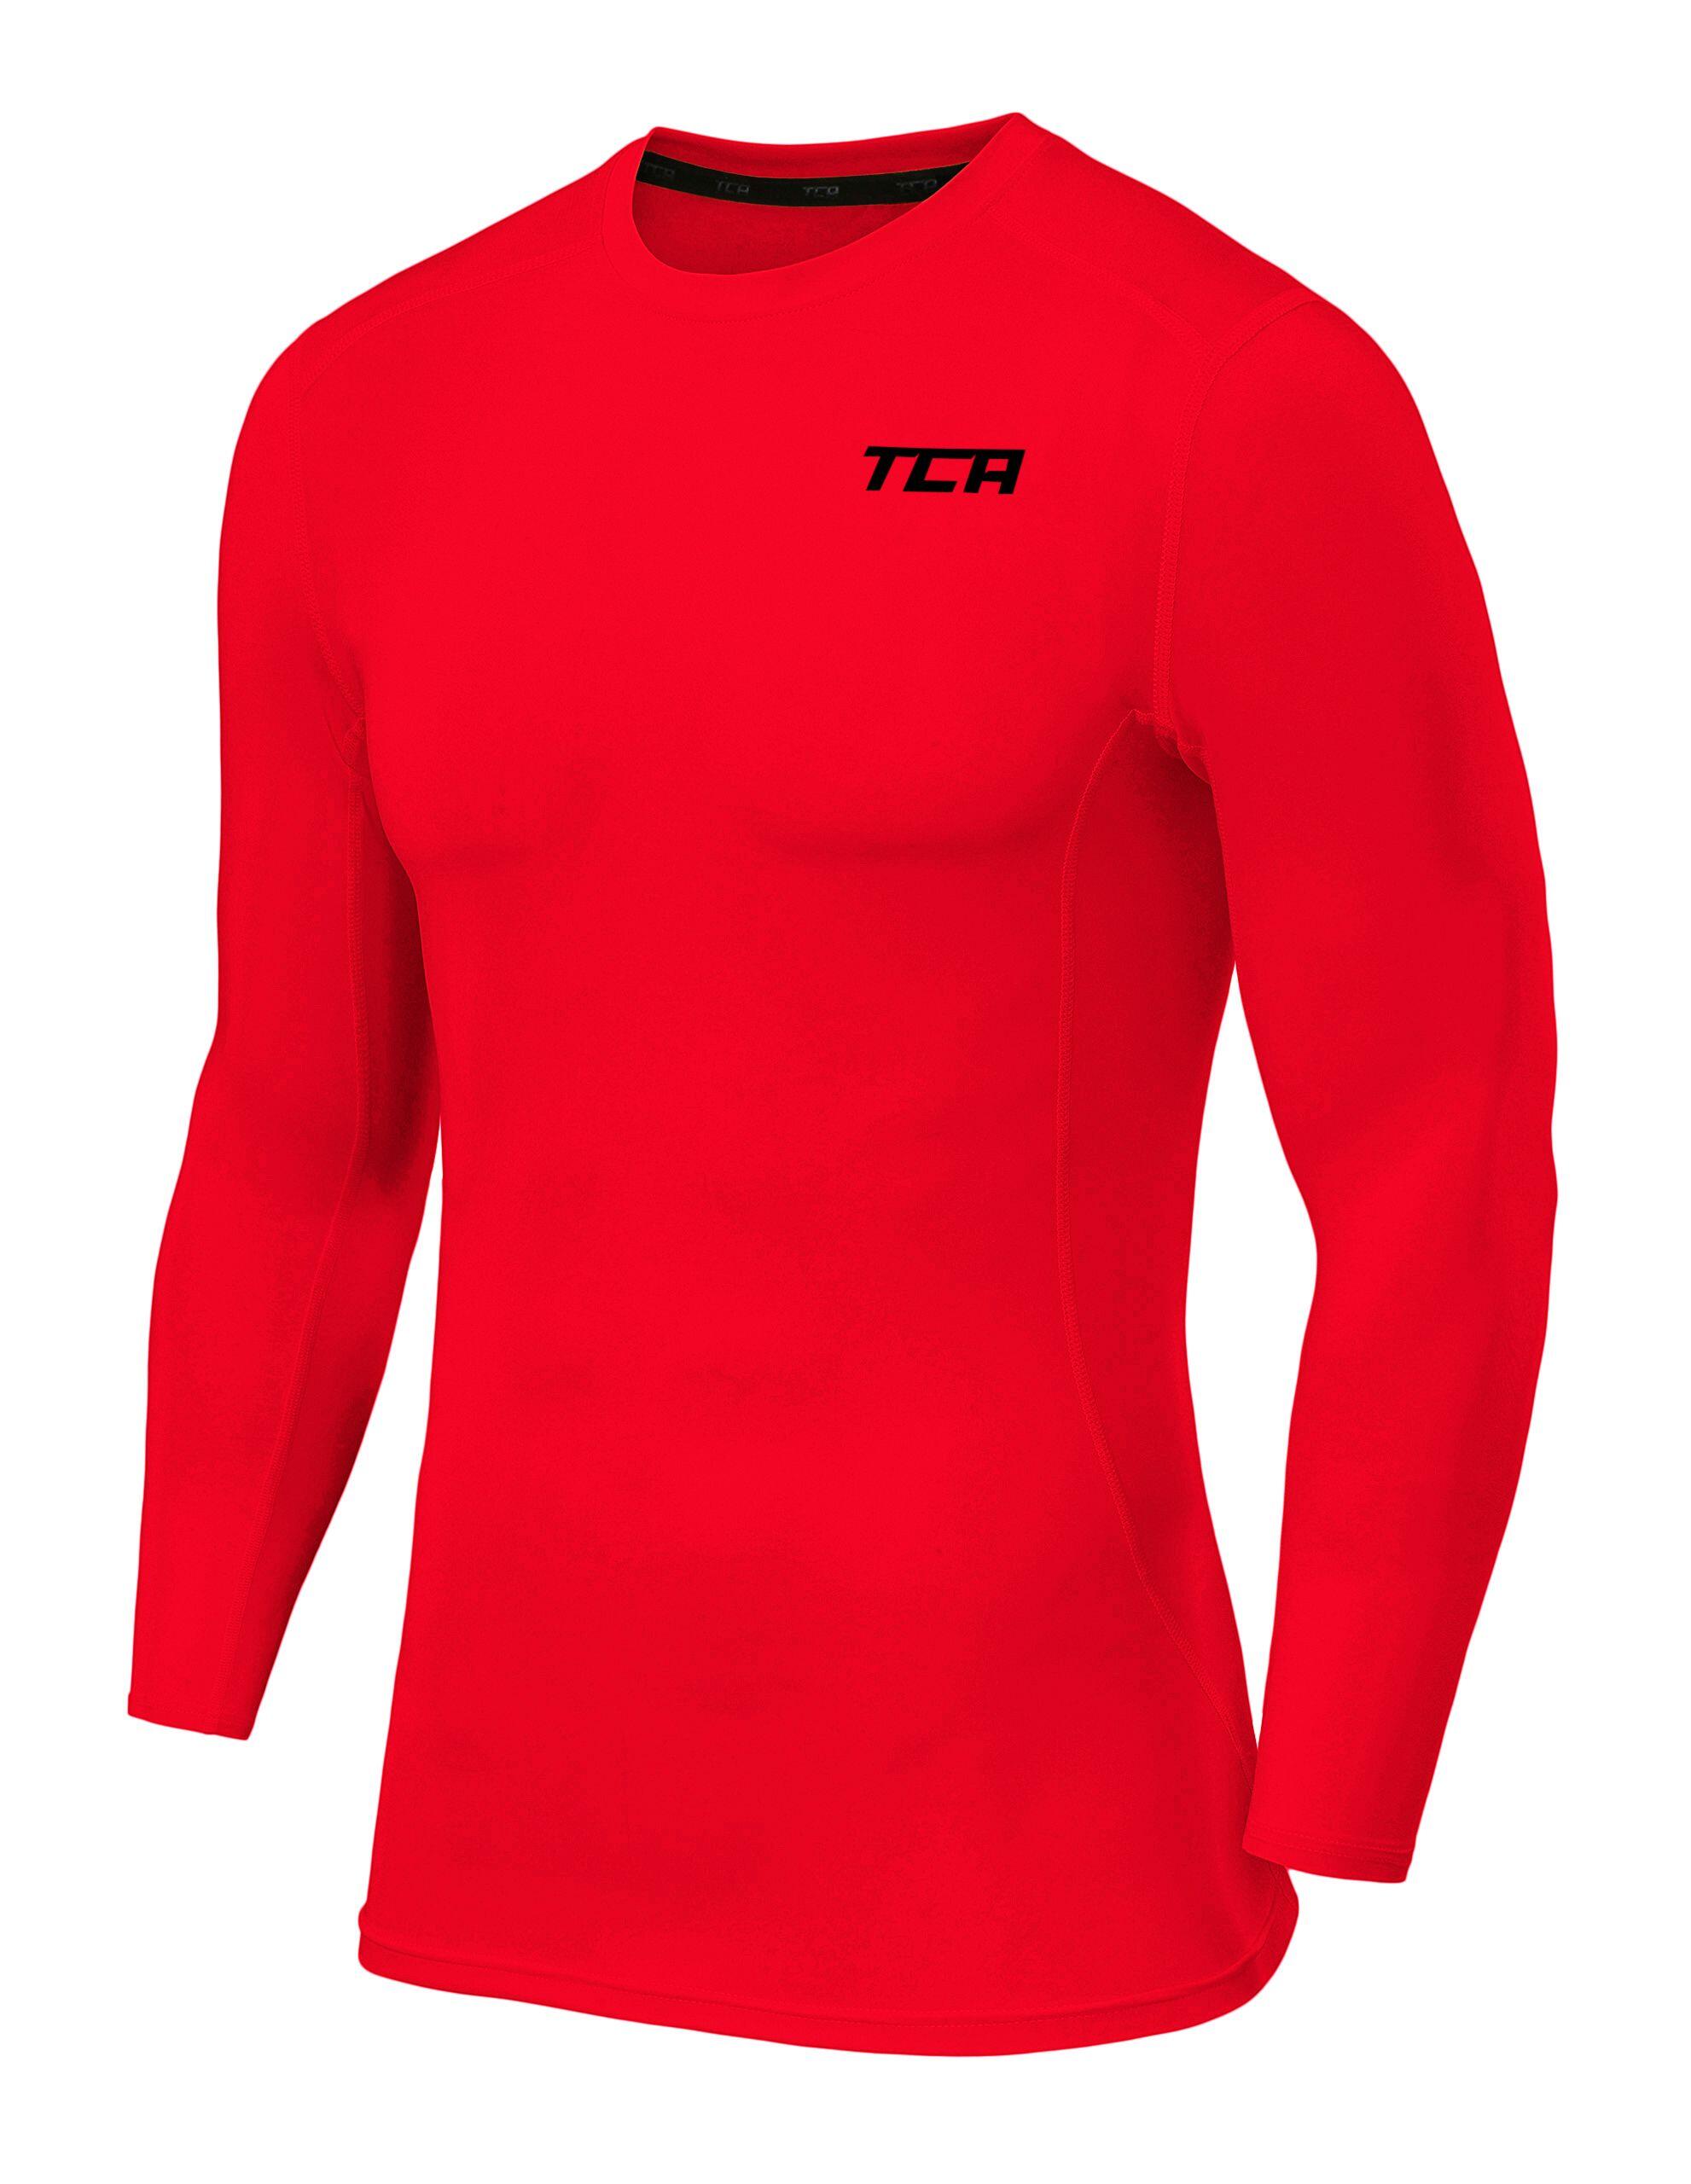 Boys' Performance Base Layer Compression Top - High Risk Red 1/5